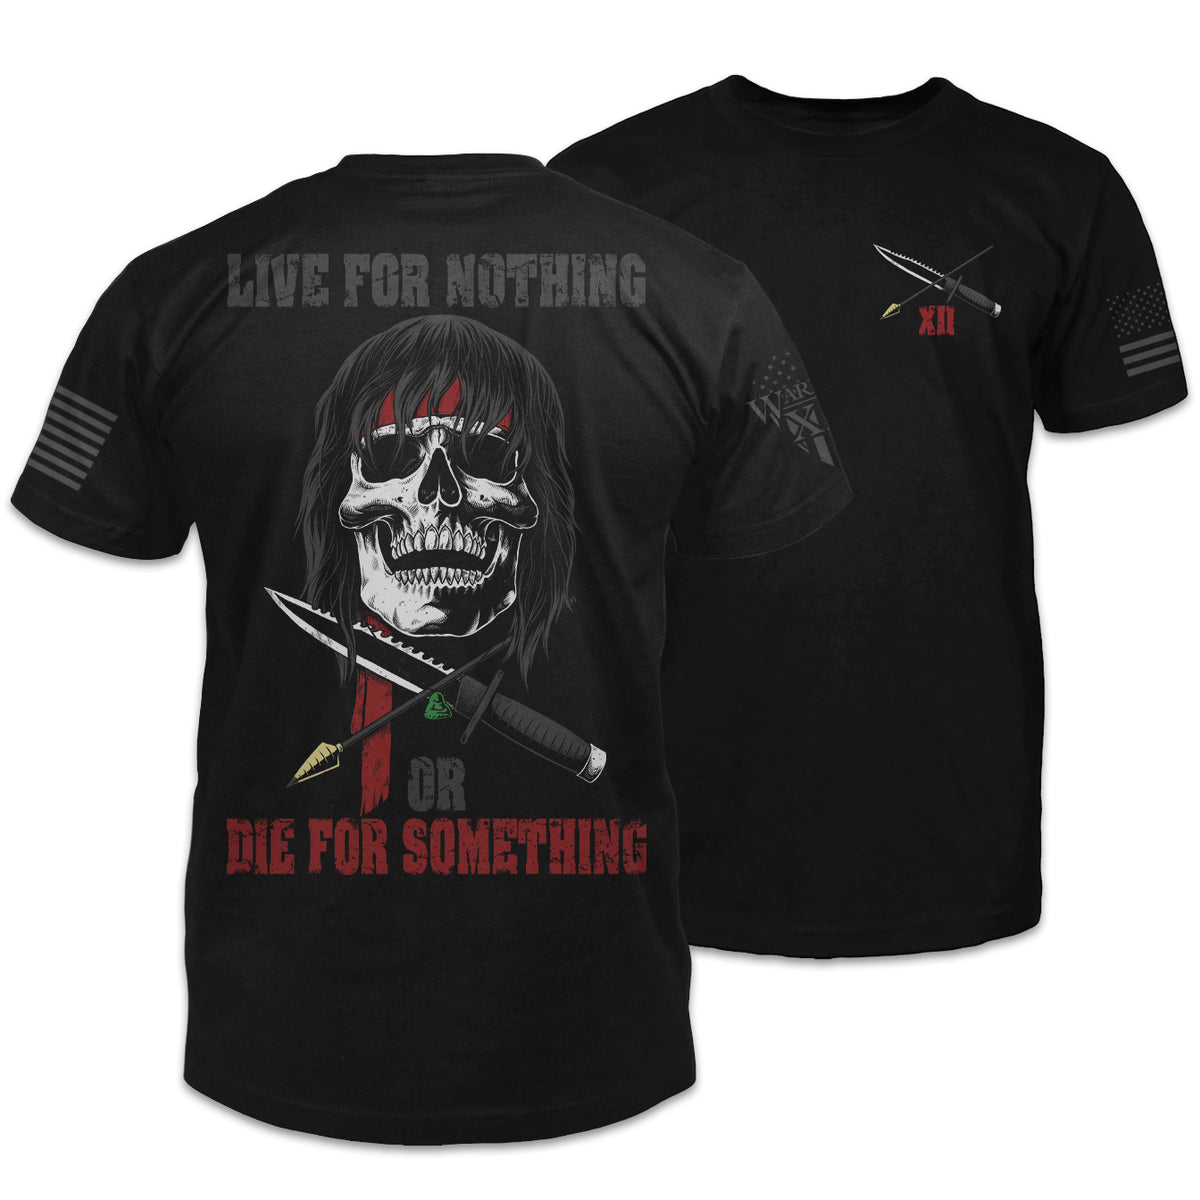 Front and back black t-shirt with the words "Live for nothing, or die for something" with a skull of Rambo printed on the shirt.